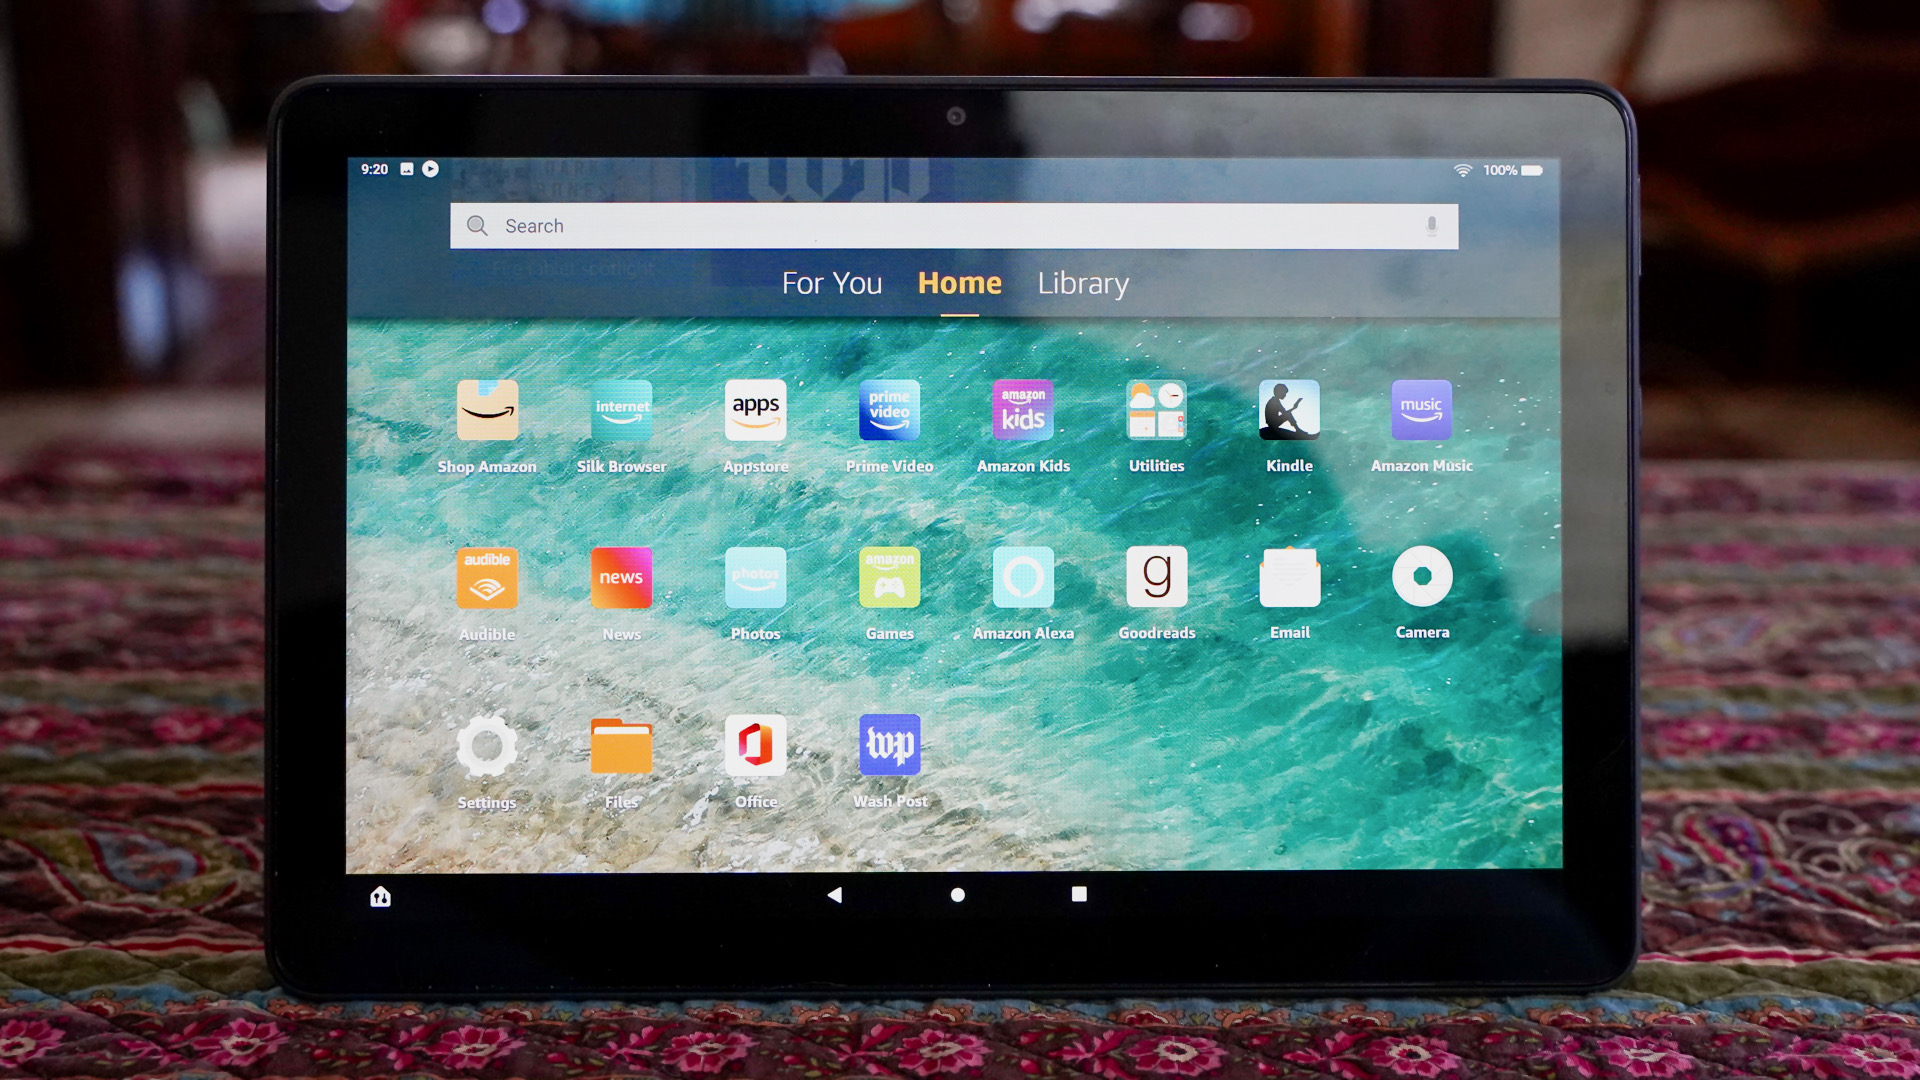 The Amazon Fire HD 10 Plus on a coffee table showing the home screen with apps.